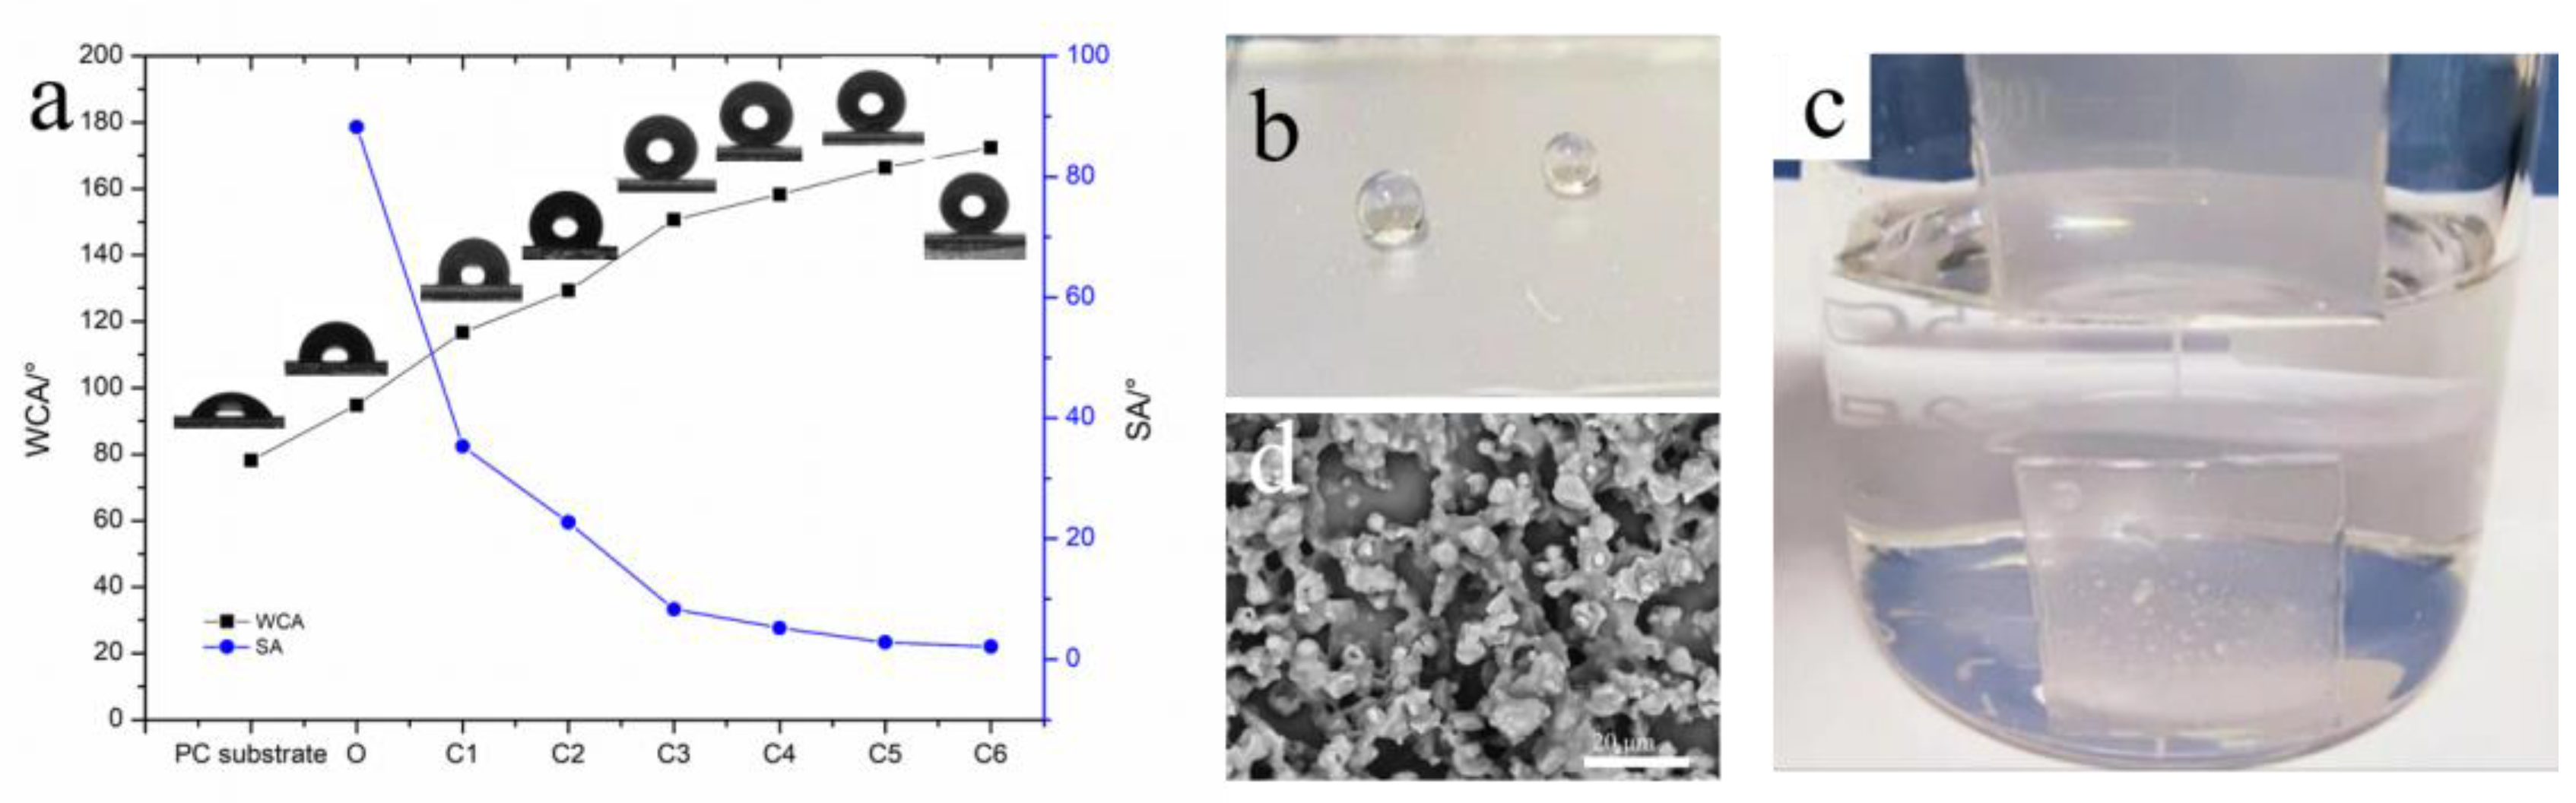 Simple spray deposition of a water-based superhydrophobic coating